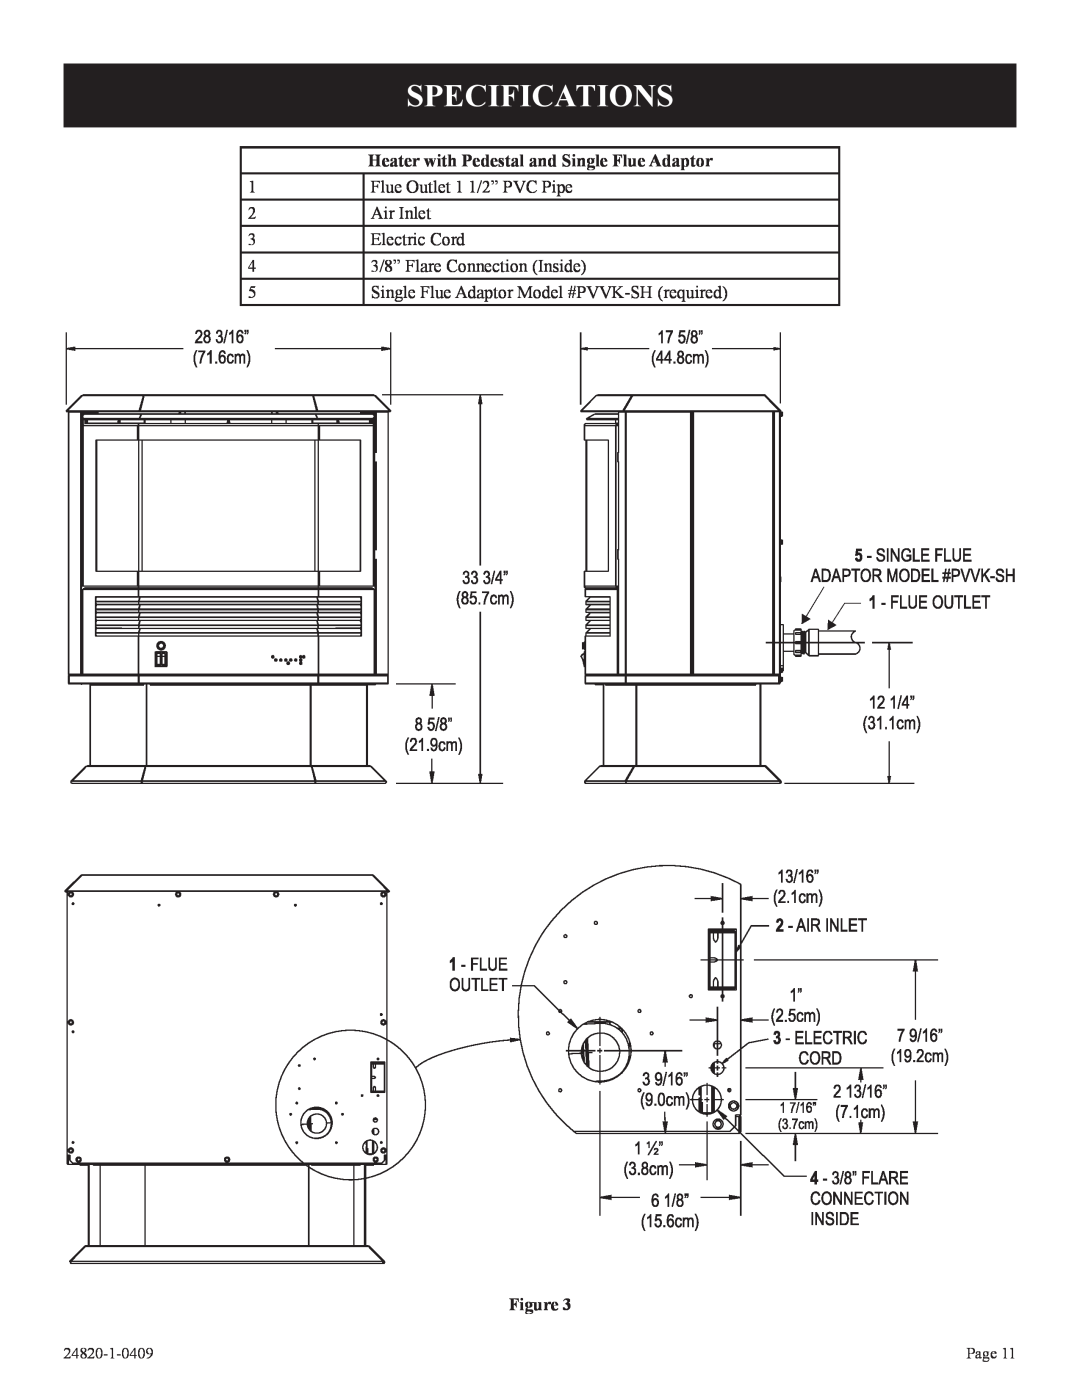 Empire Comfort Systems PV-28SV55-(C,G)(N,P)-1 Specifications, Heater with Pedestal and Single Flue Adaptor, 24820-1-0409 